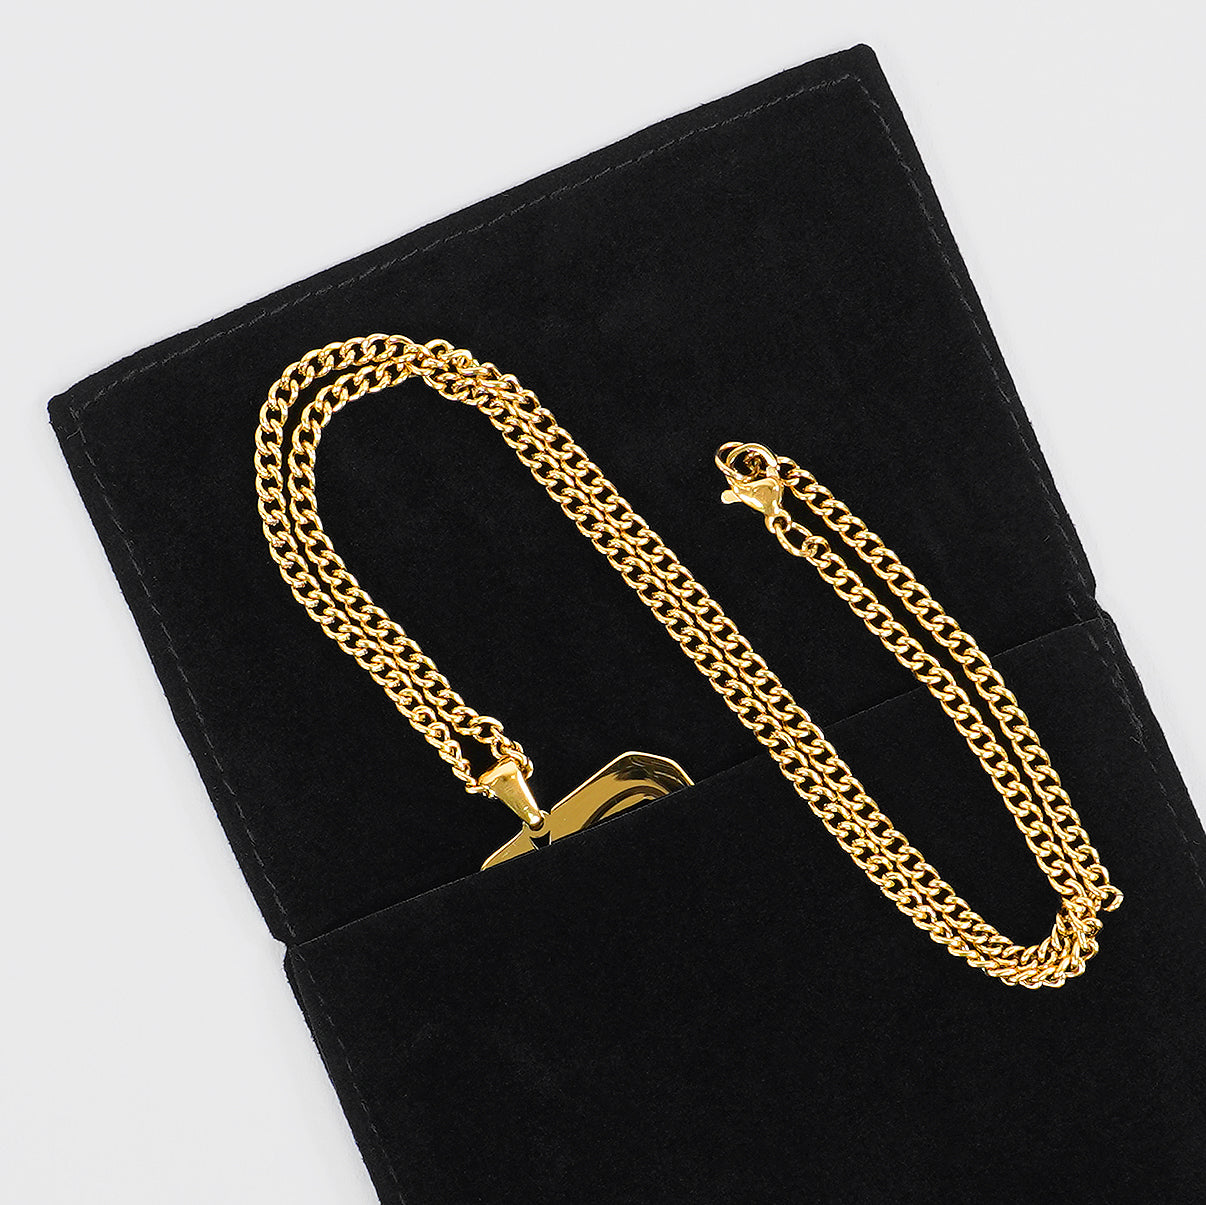 9 Number Pendant with Chain Necklace - Gold Plated Stainless Steel